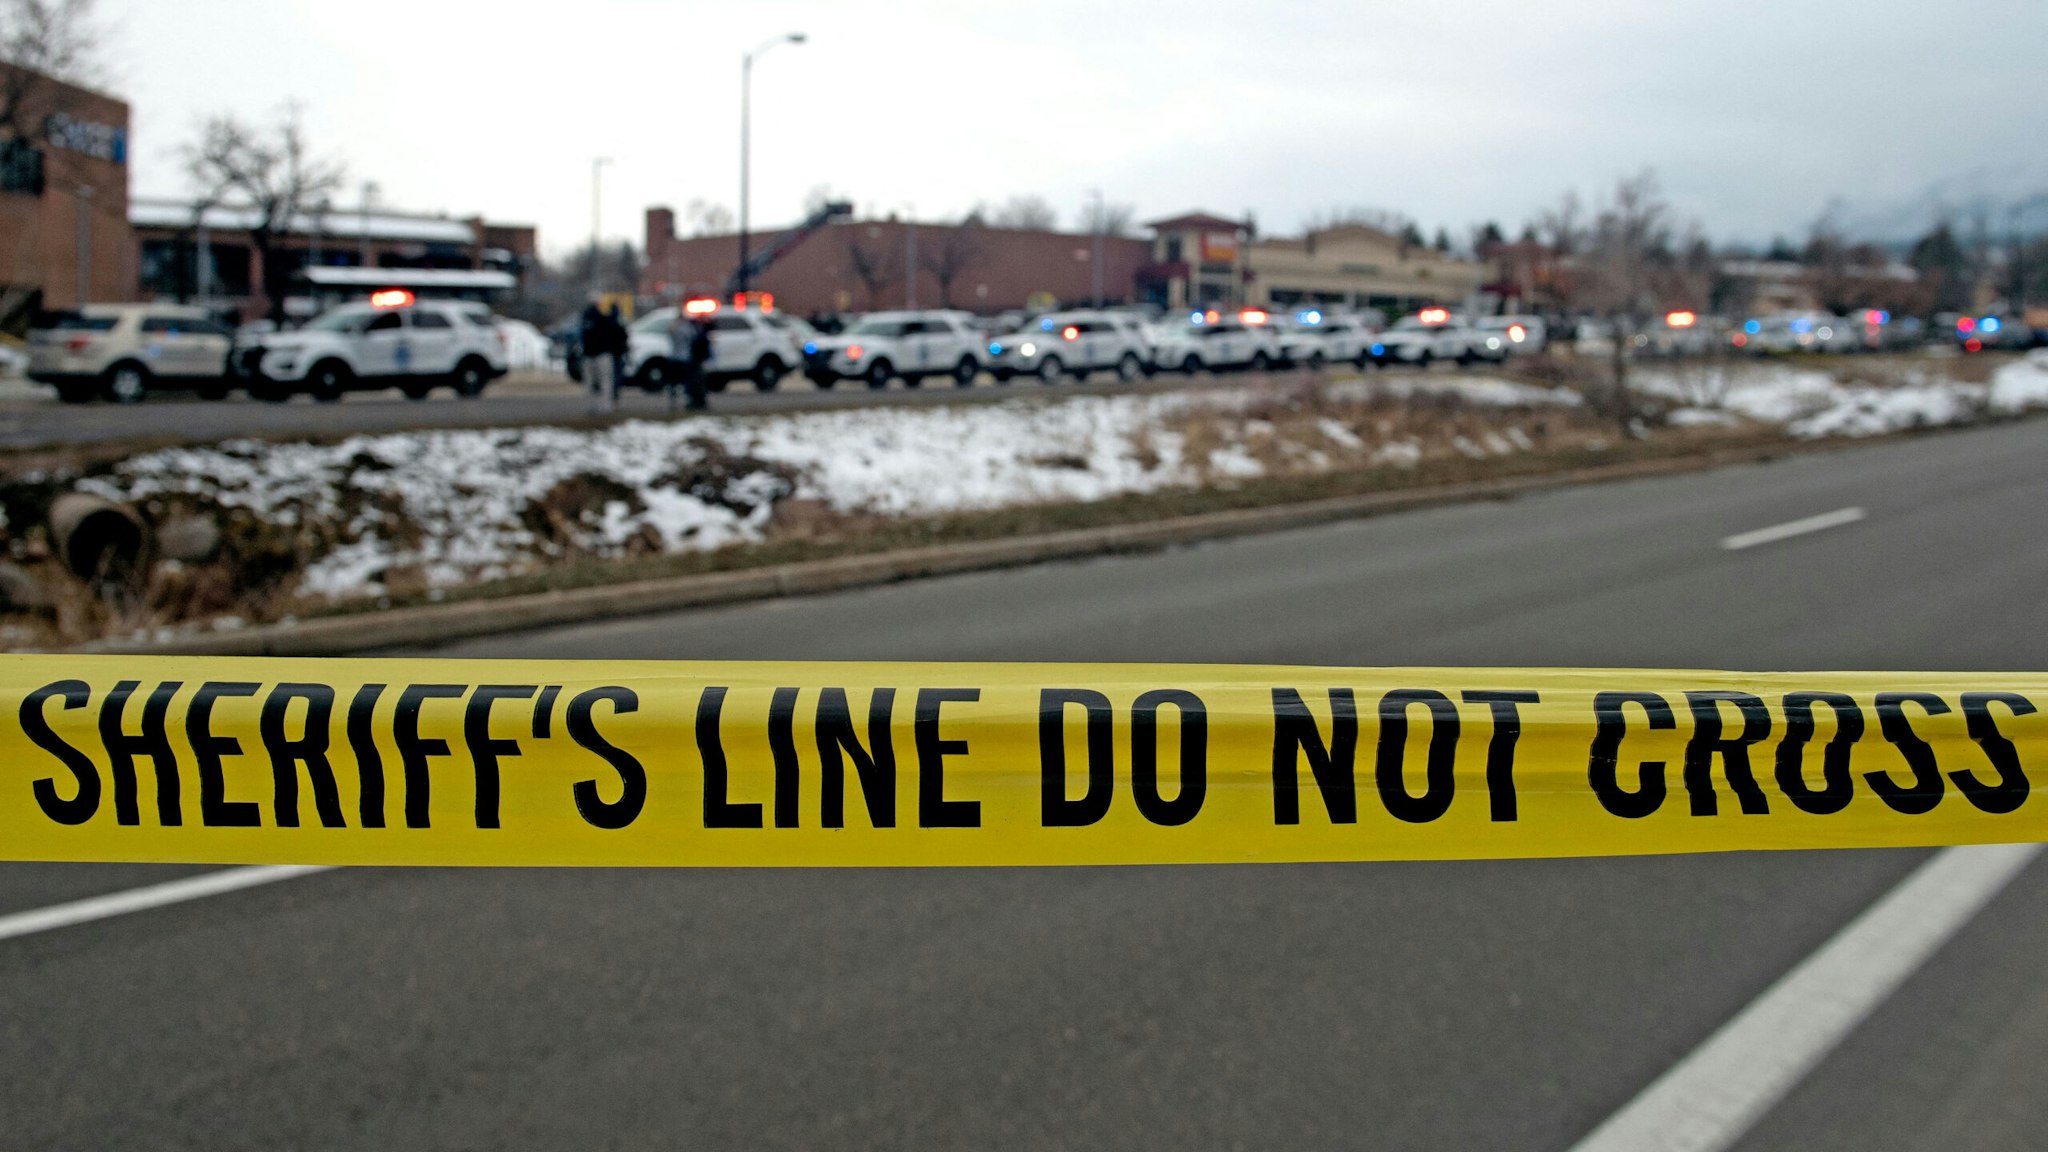 Crime scene tape closes off access to the King Soopers grocery store in Boulder, Colorado on March 22, 2021 after reports of an active shooter. - Police swarmed a grocery store in the western US state of Colorado on March 22, 2021, following reports of an active shooter and multiple casualties, law enforcement and eyewitnesses said, with at least one man detained. No details of casualties have been confirmed, but Colorado governor Jared Polis and Boulder Mayor Sam Weaver each referred to the incident as a "tragedy" in statements on Twitter.